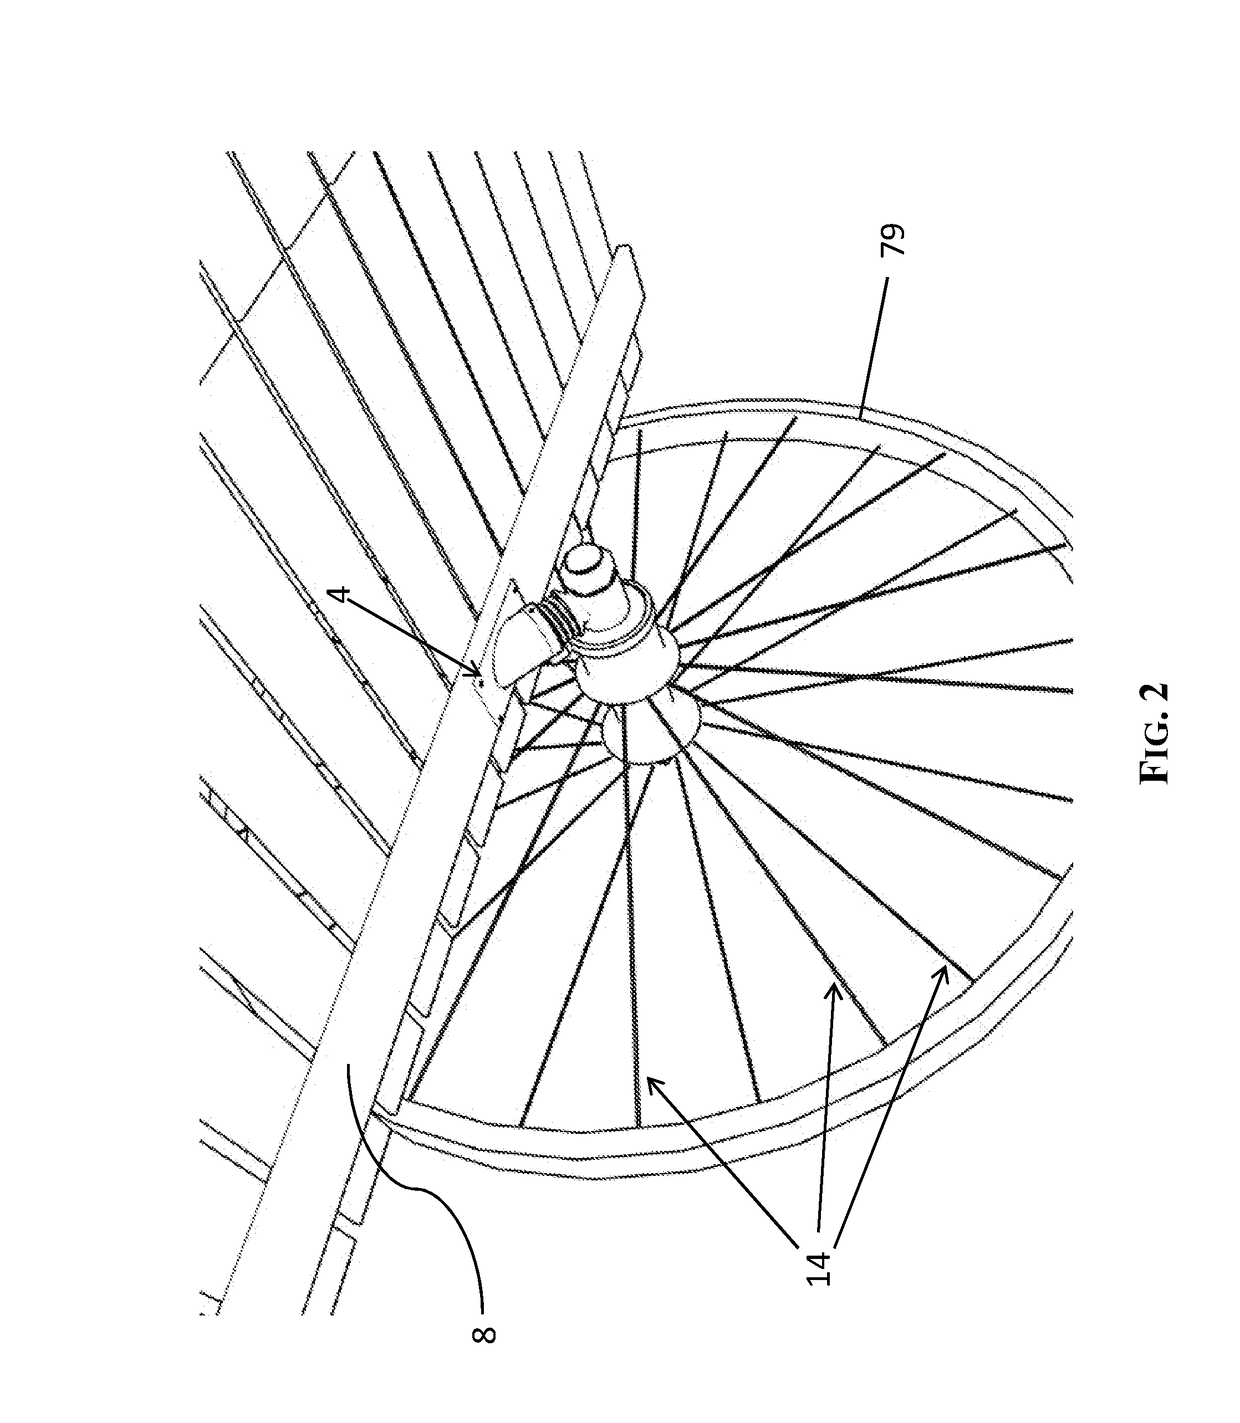 Weight activated wheel brake apparatus and system